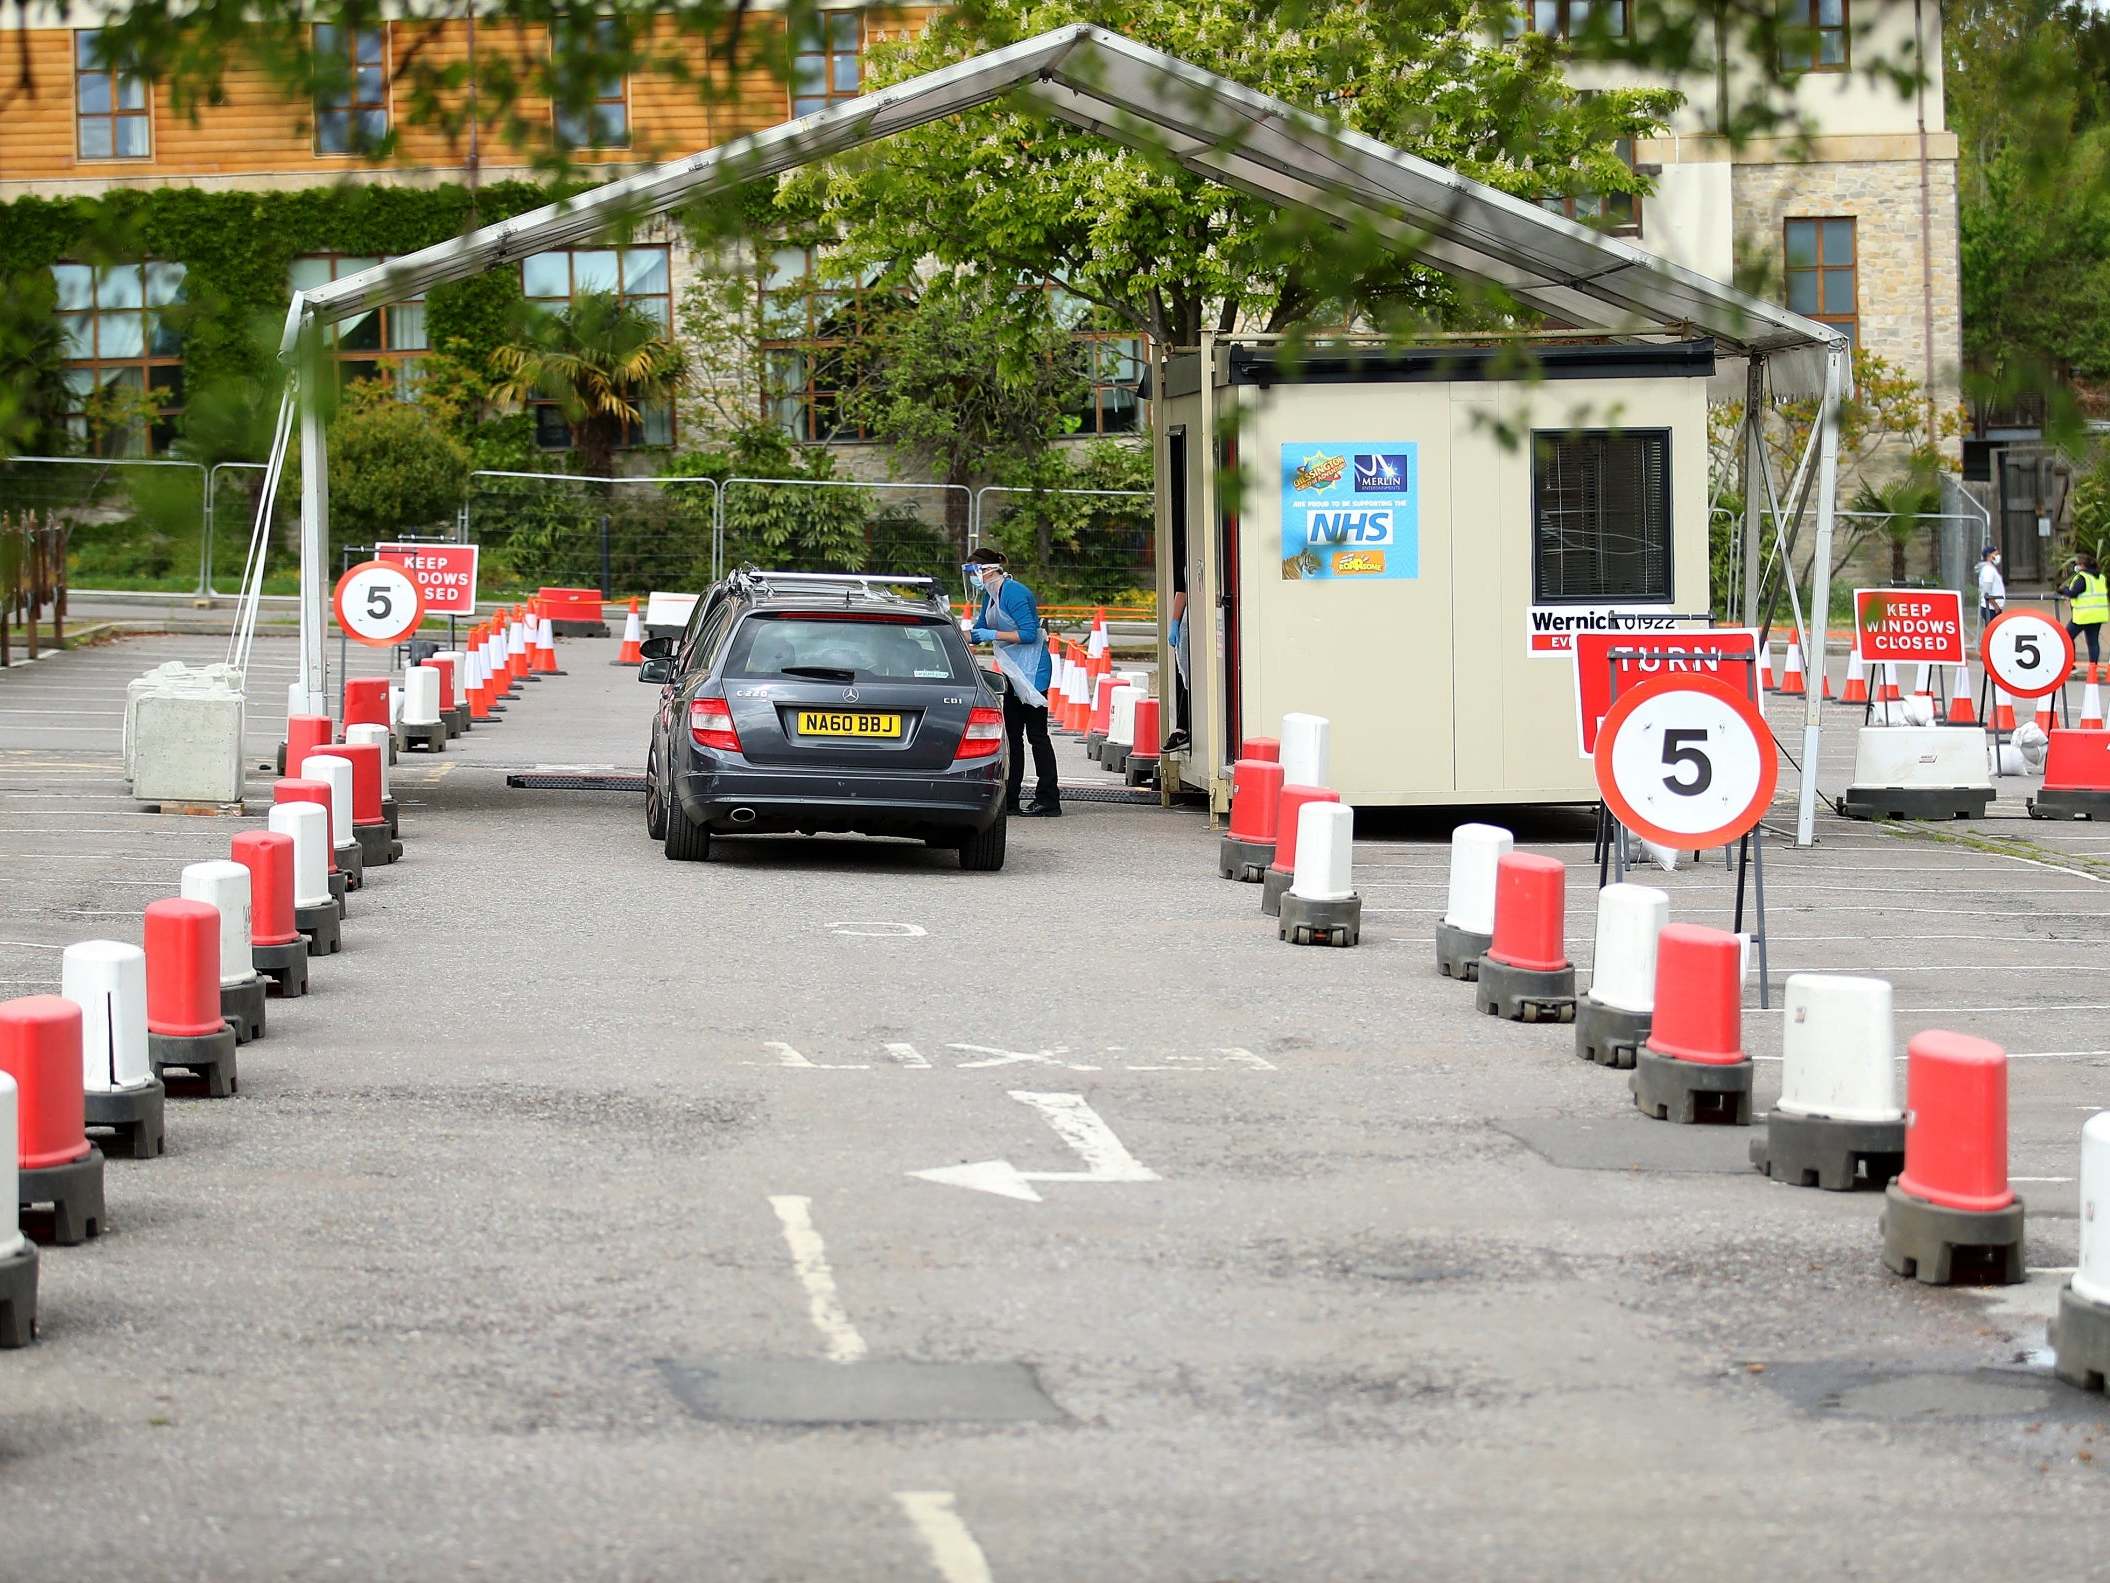 Cars are parked awaiting a swap test at a coronavirus drive-through testing centre in a car park in London